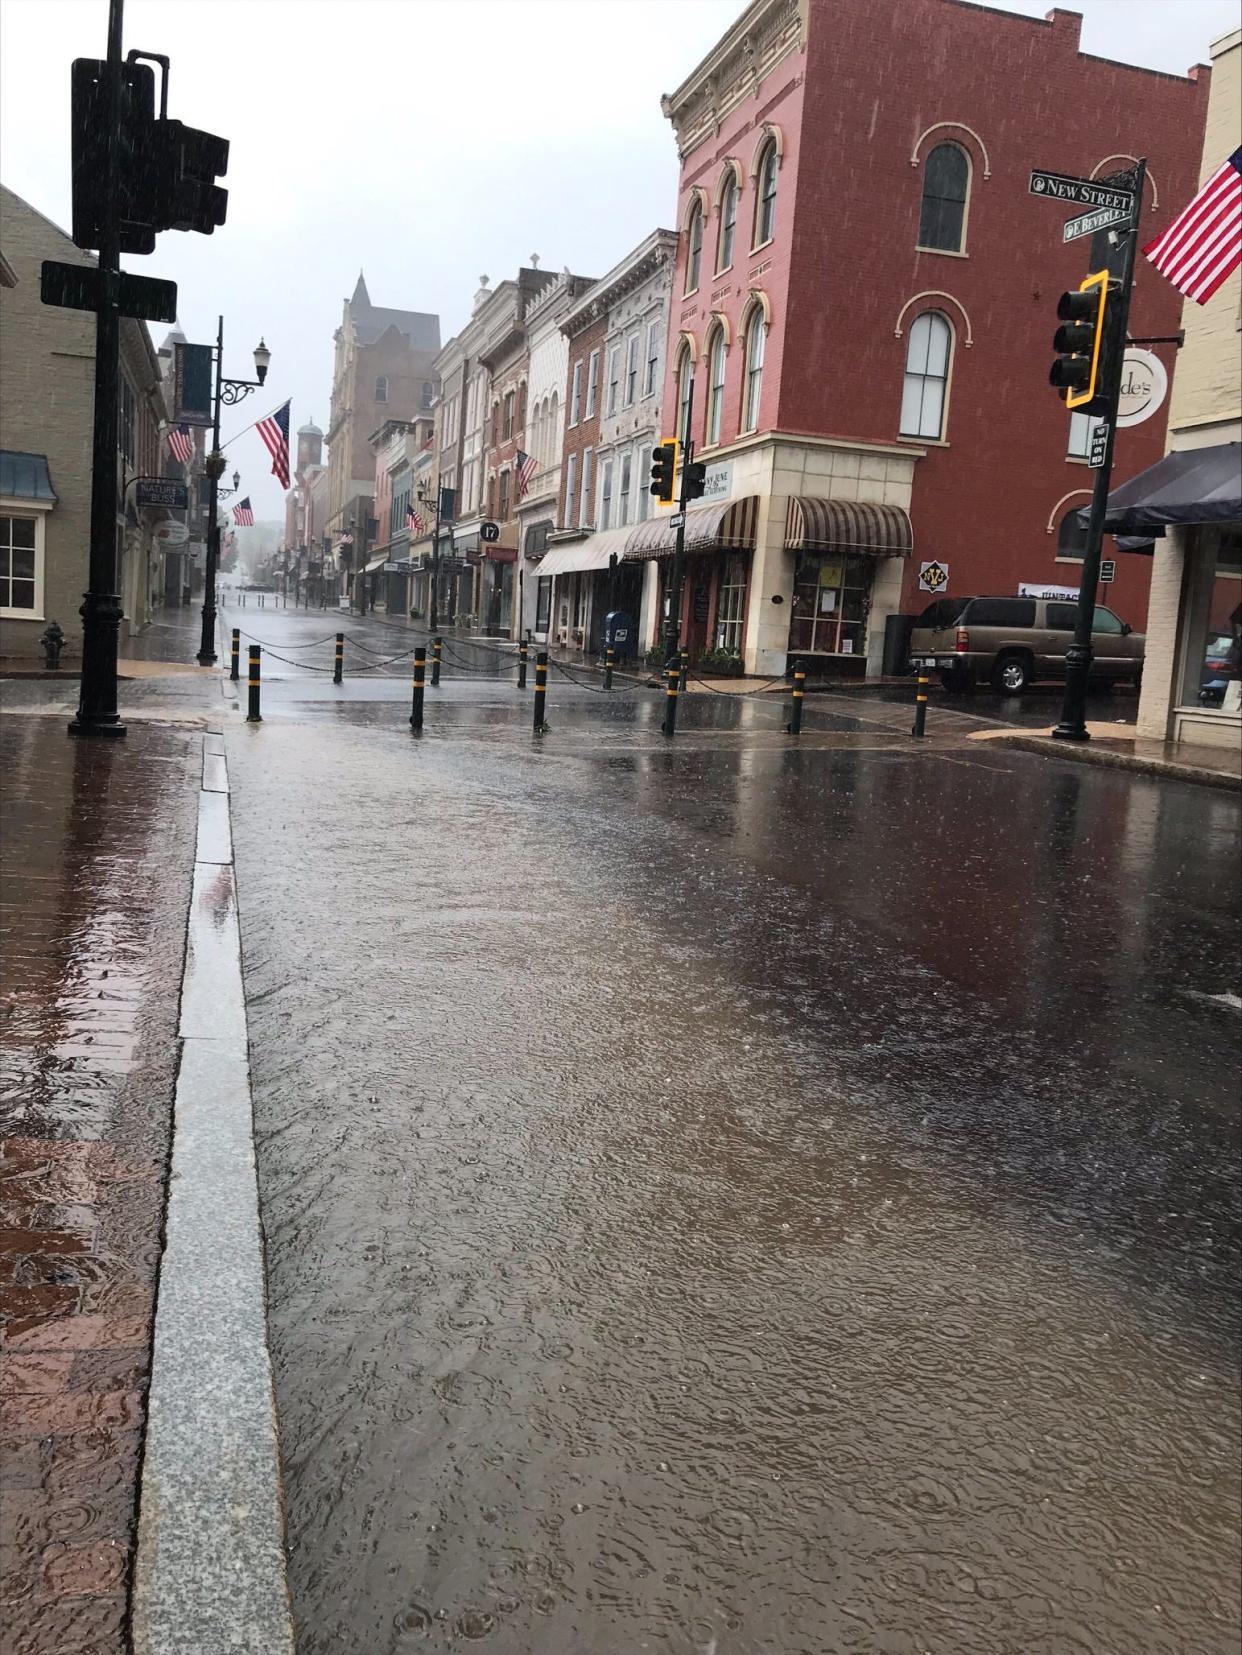 Rainfall totals of two to three inches with localized amounts up to four inches possible on Tuesday, according to National Weather Service.